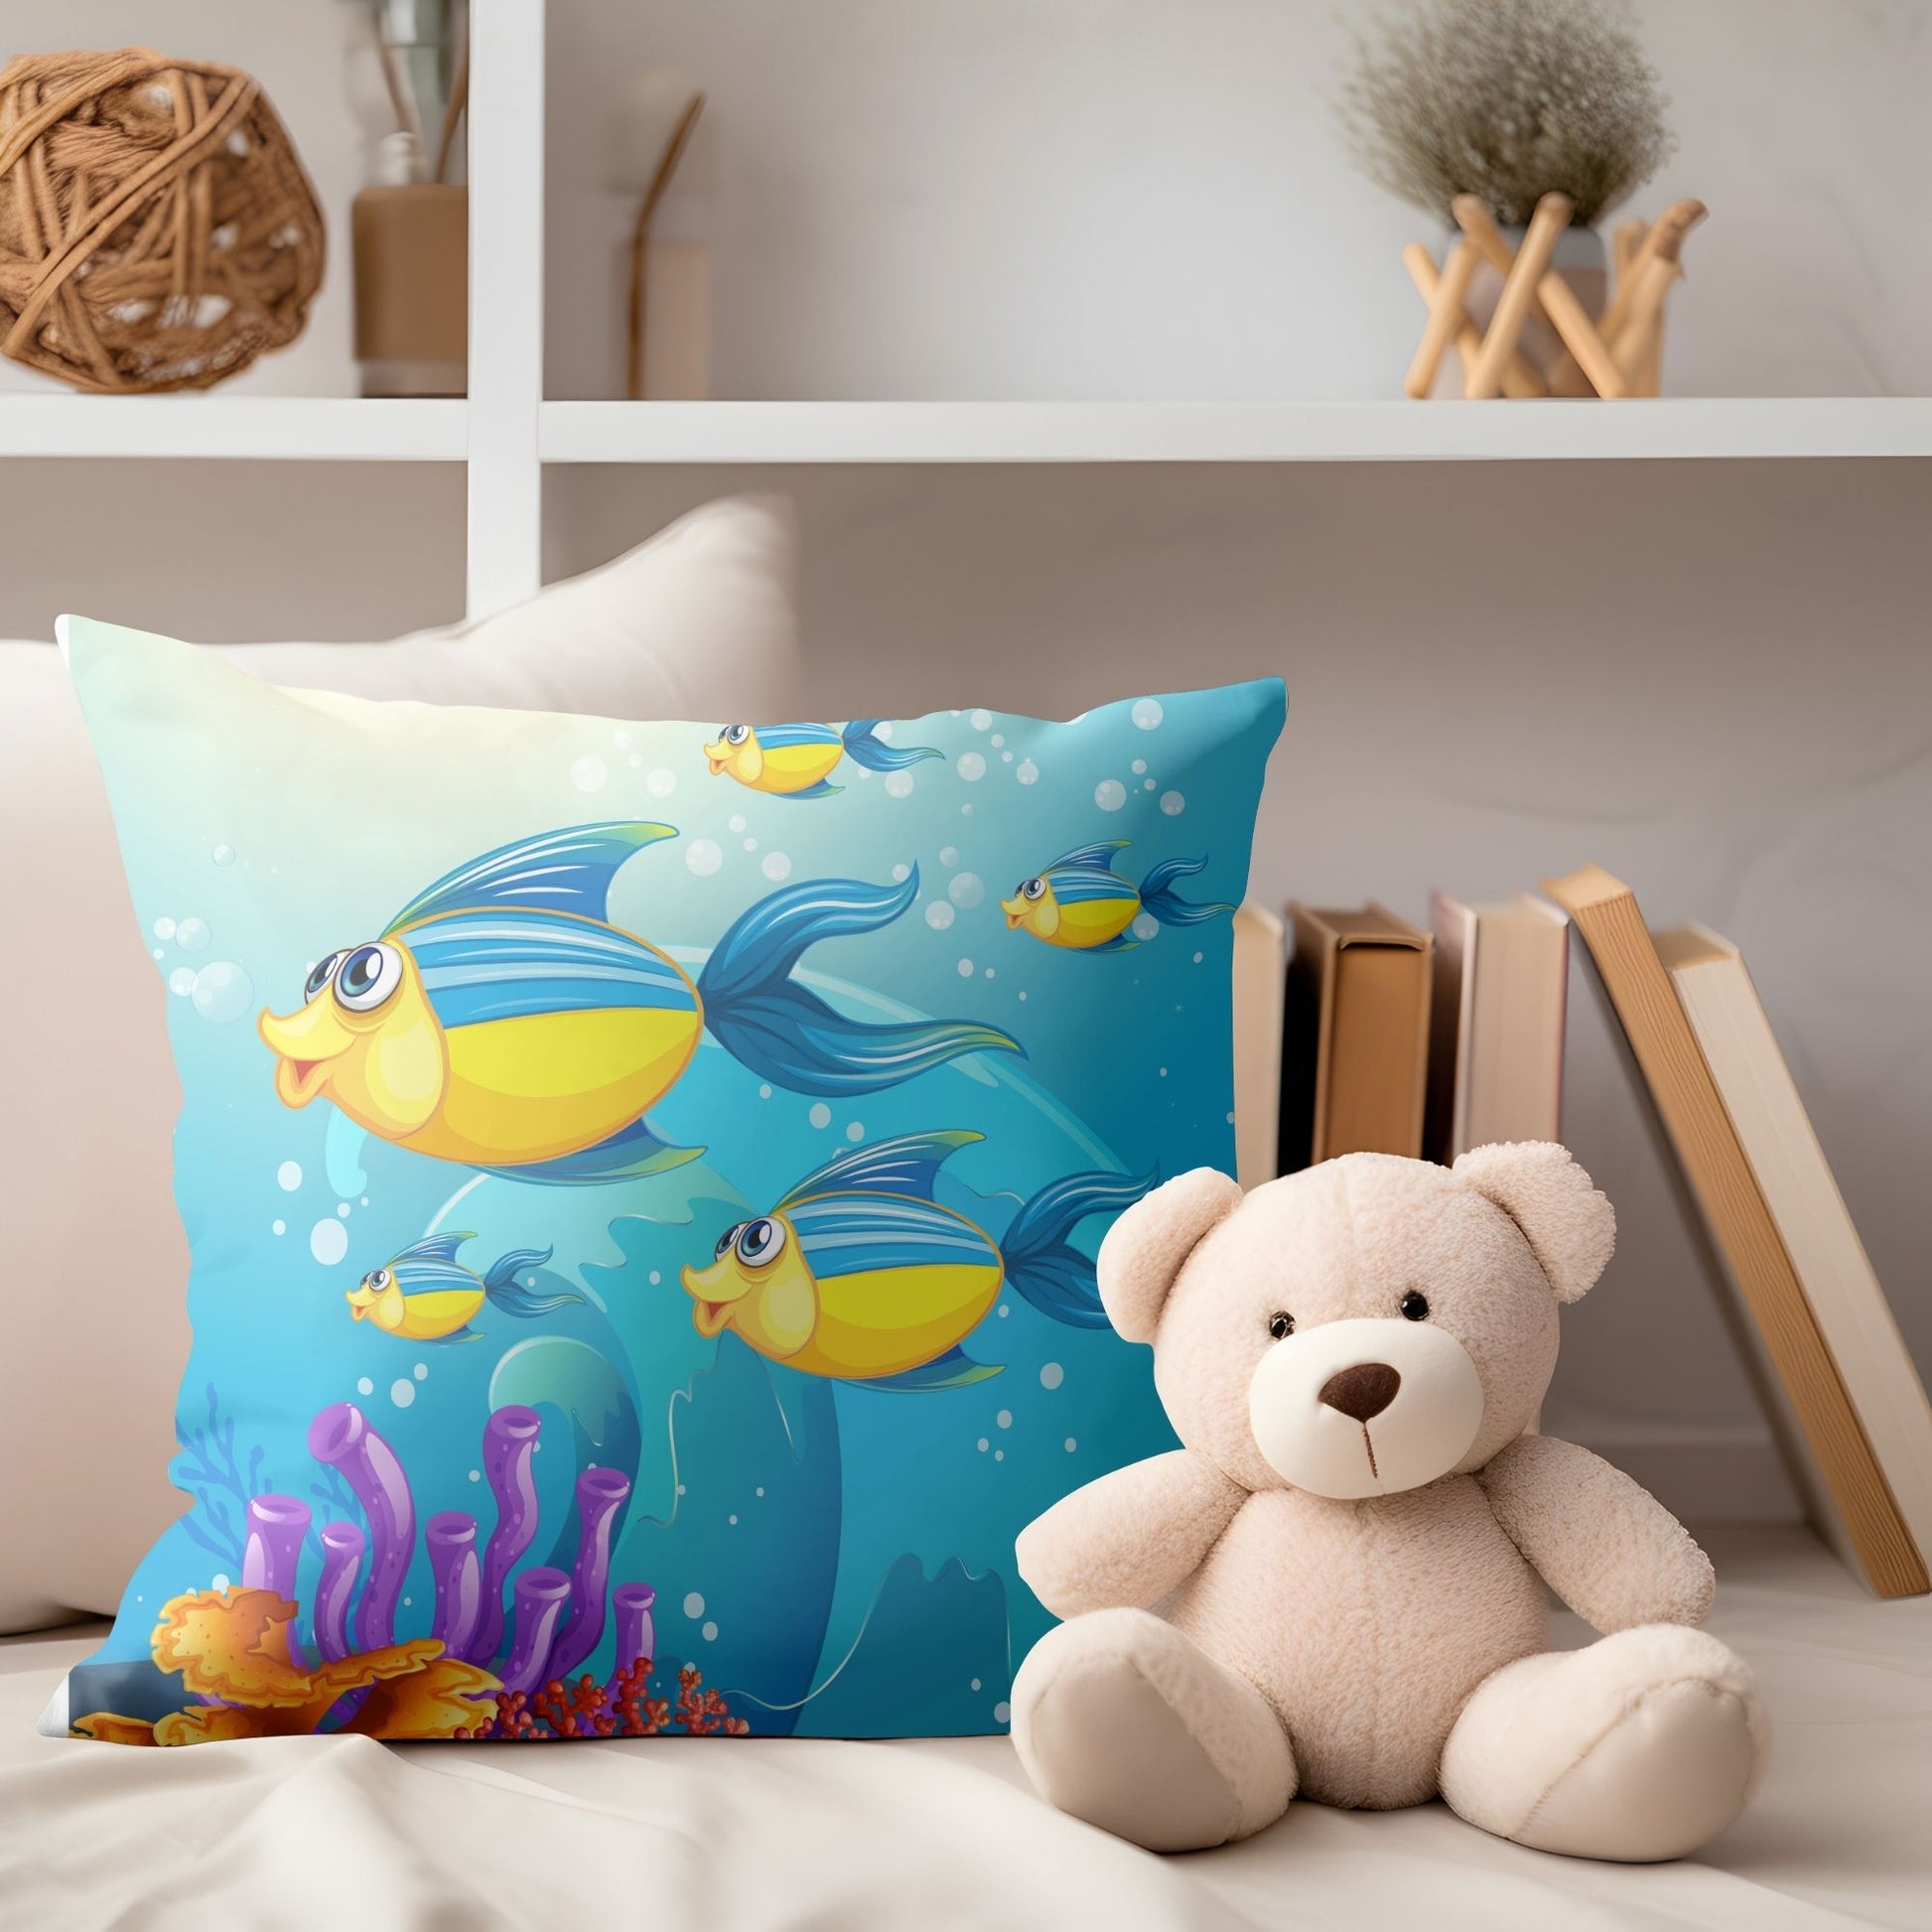 Cozy pillow with adorable ocean fishes perfect for children's comfort.